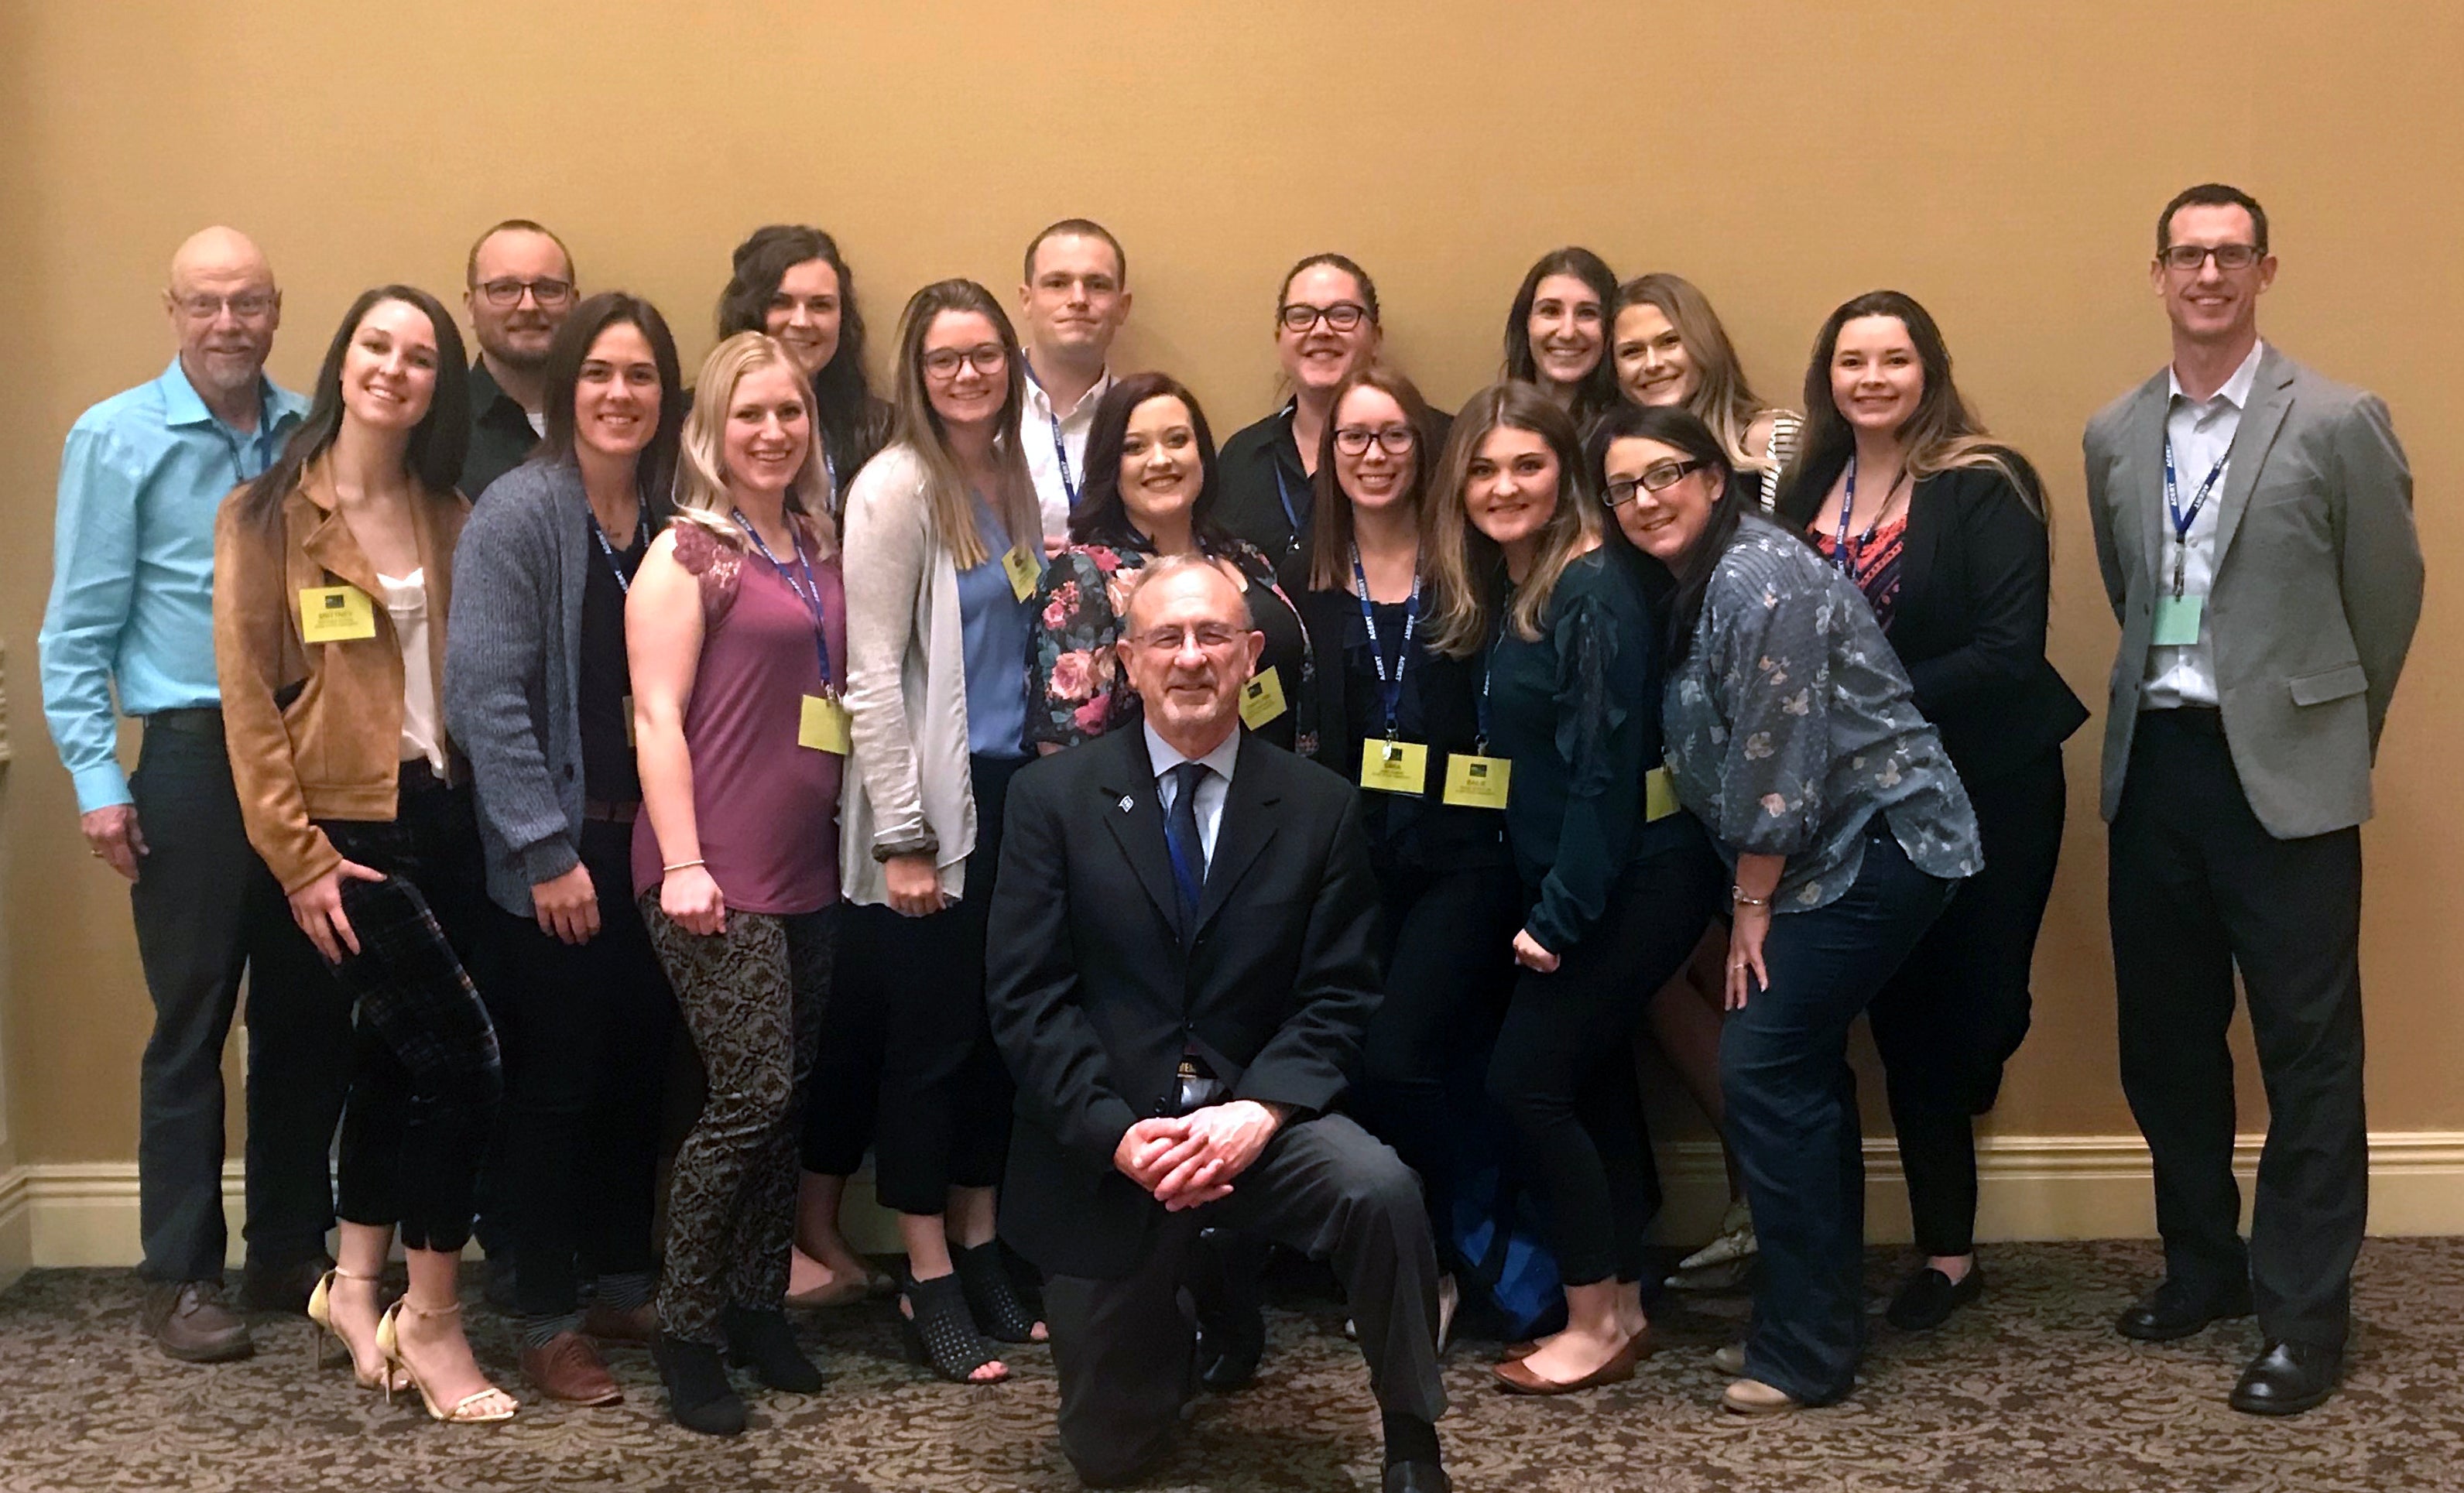 Boise State’s Radiologic Sciences program at the 2019 ACERT conference